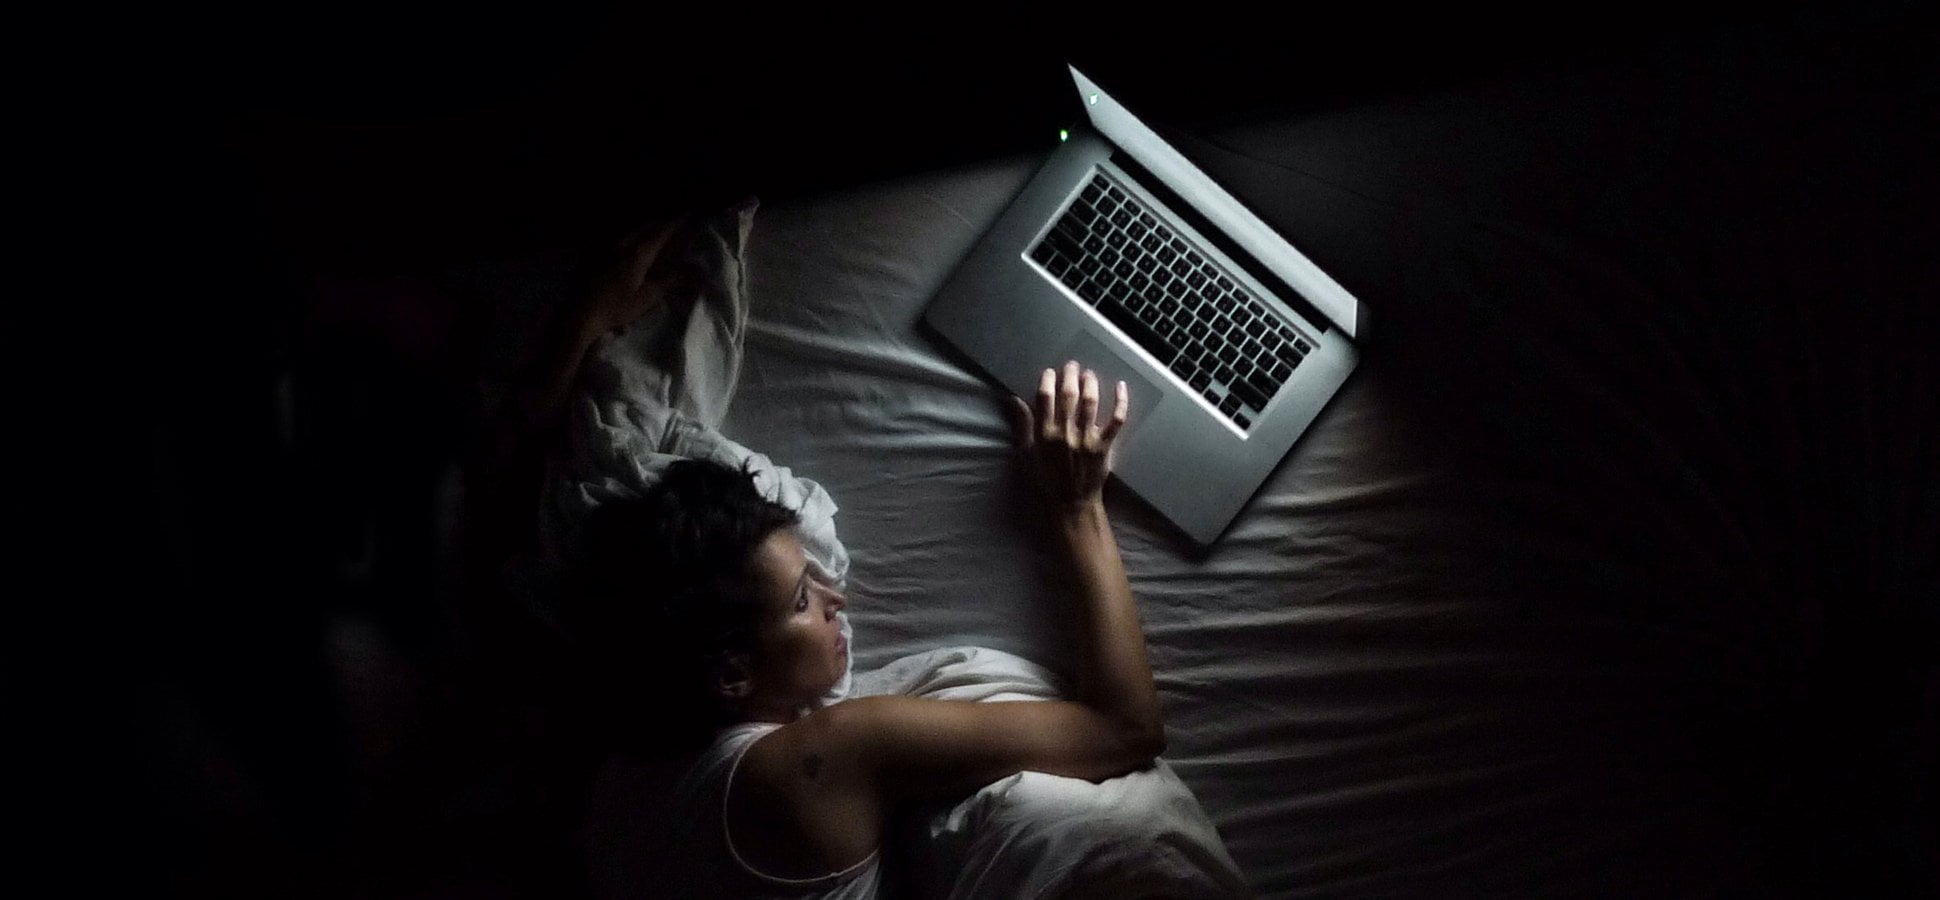 Falling asleep to Laptop radiations is deemed harmful by health experts